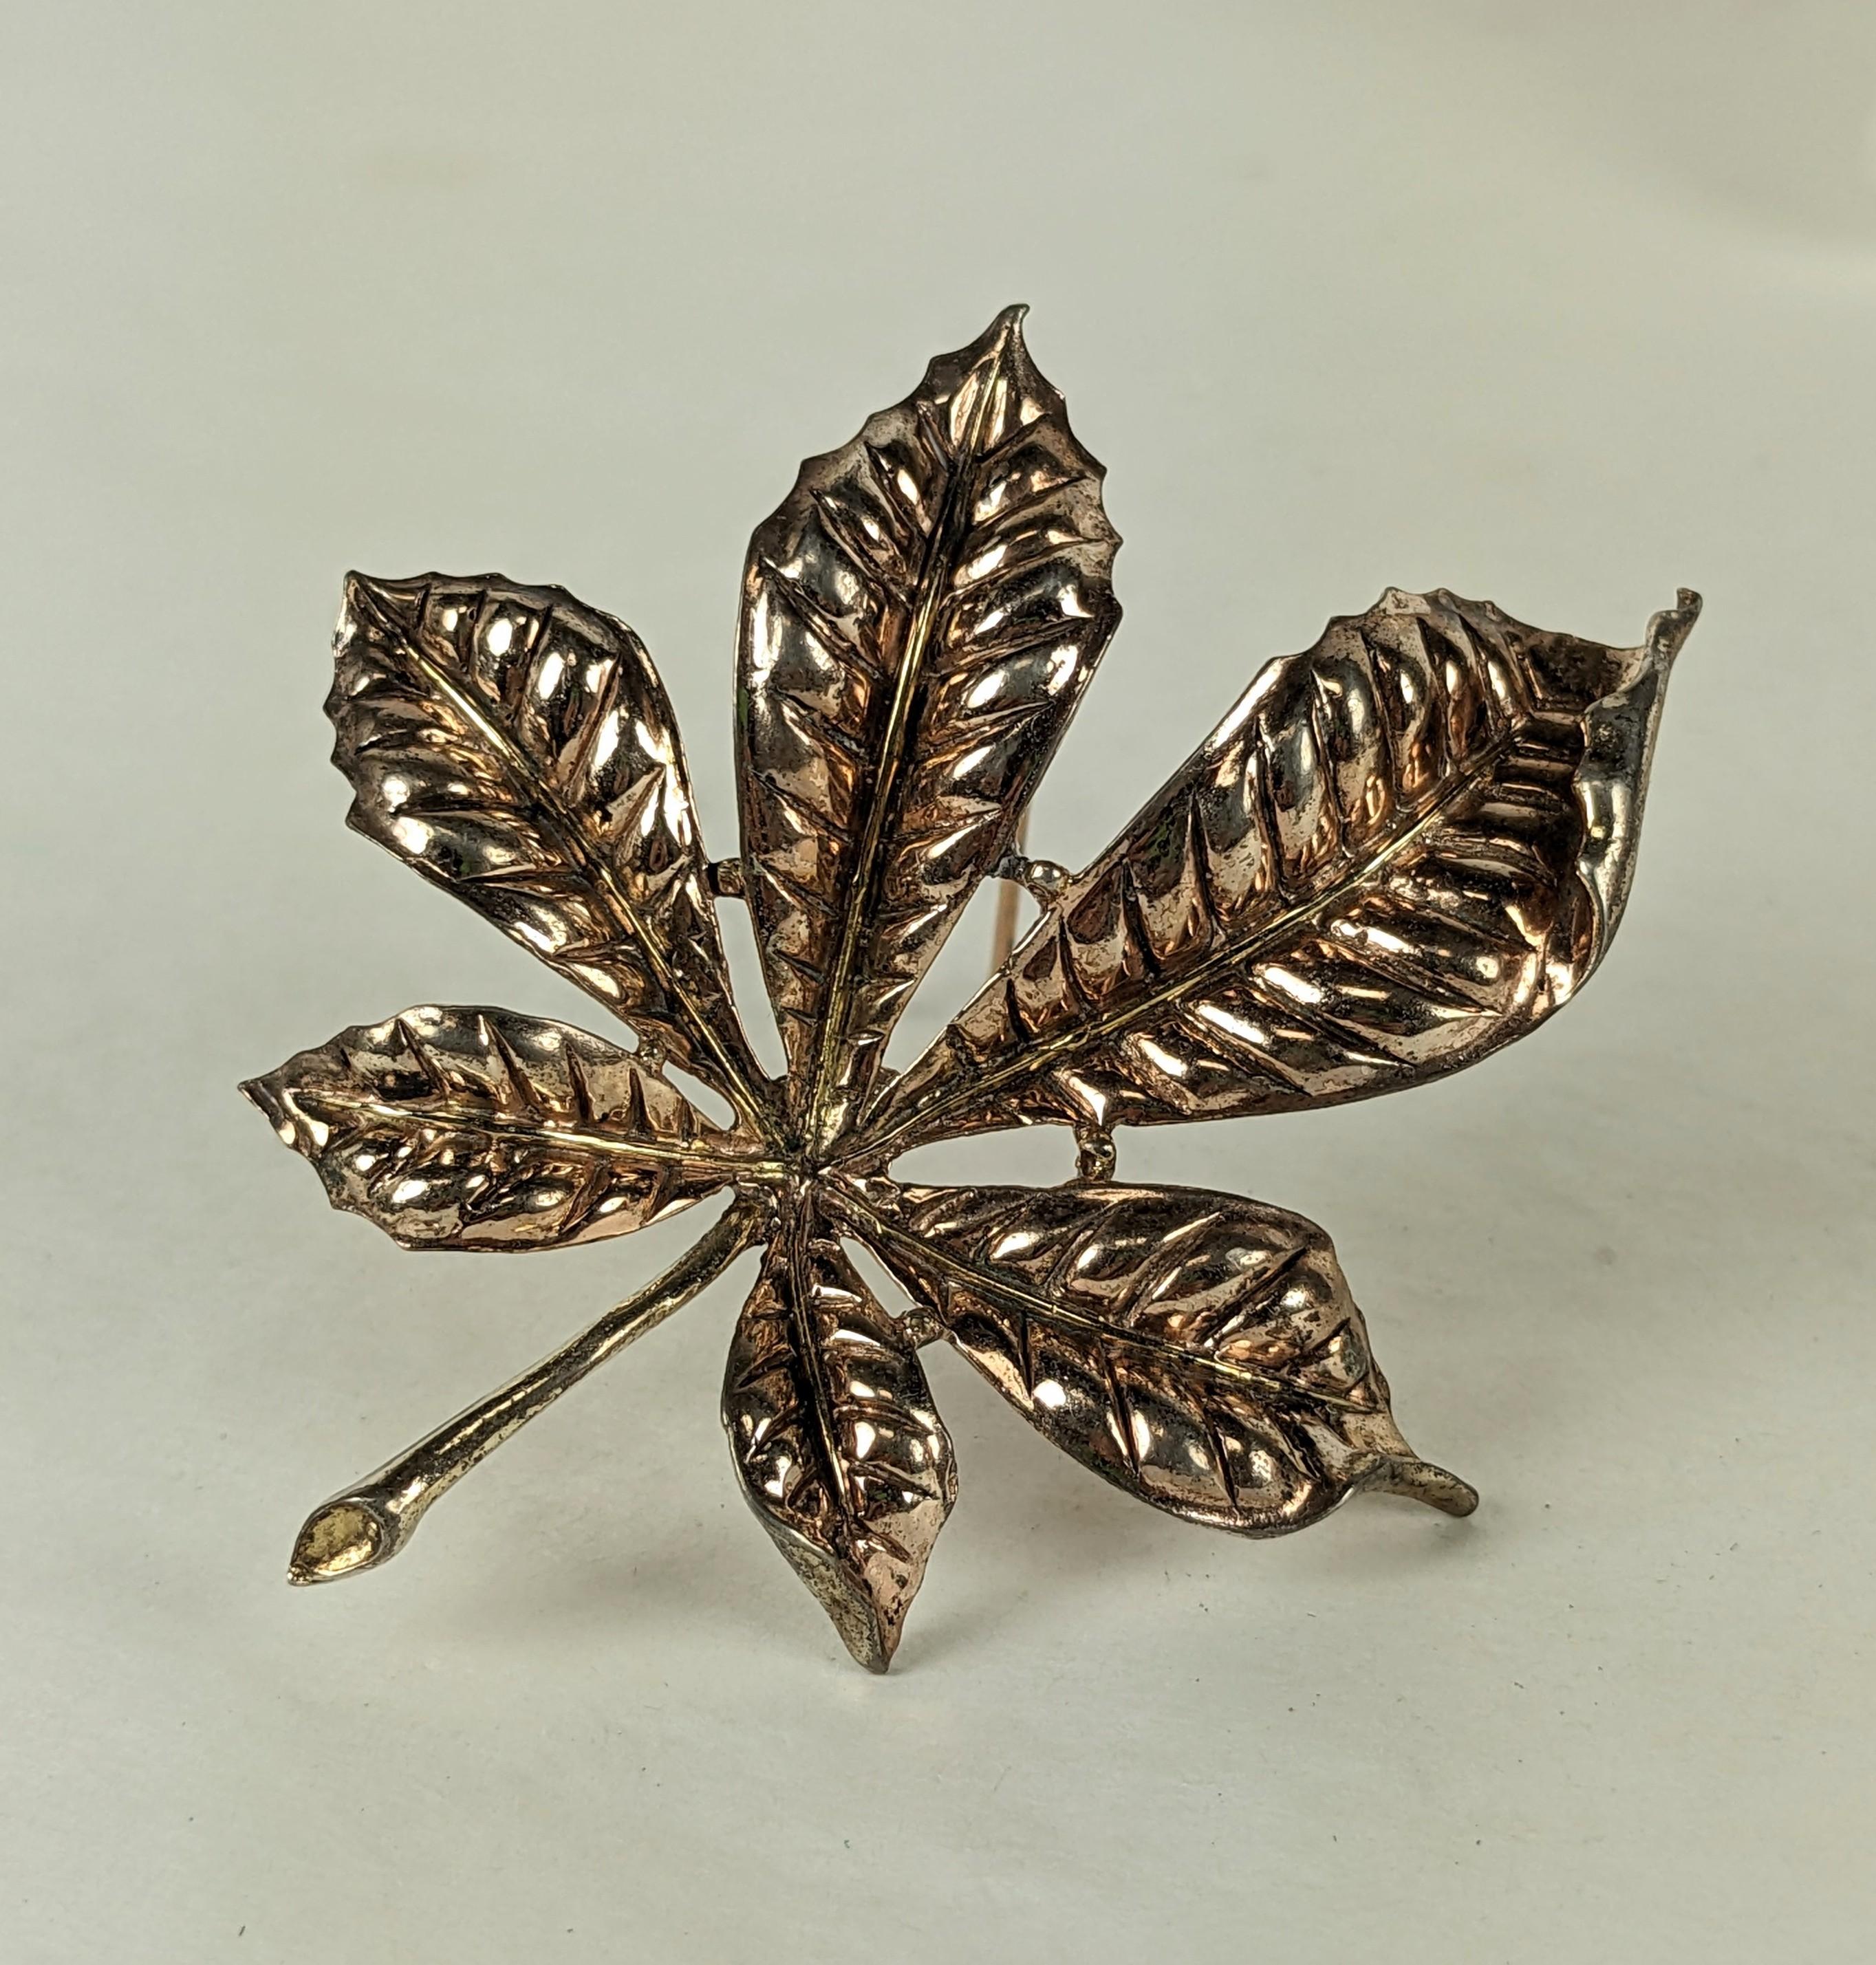 Retro Trifari Sterling Vermeil Clip Brooch by Alfred Phillipe from the 1940's. Finely detailed with pink gold vermeil over sterling. Clip back fittings. 1940's USA. 2.5 x 2.25